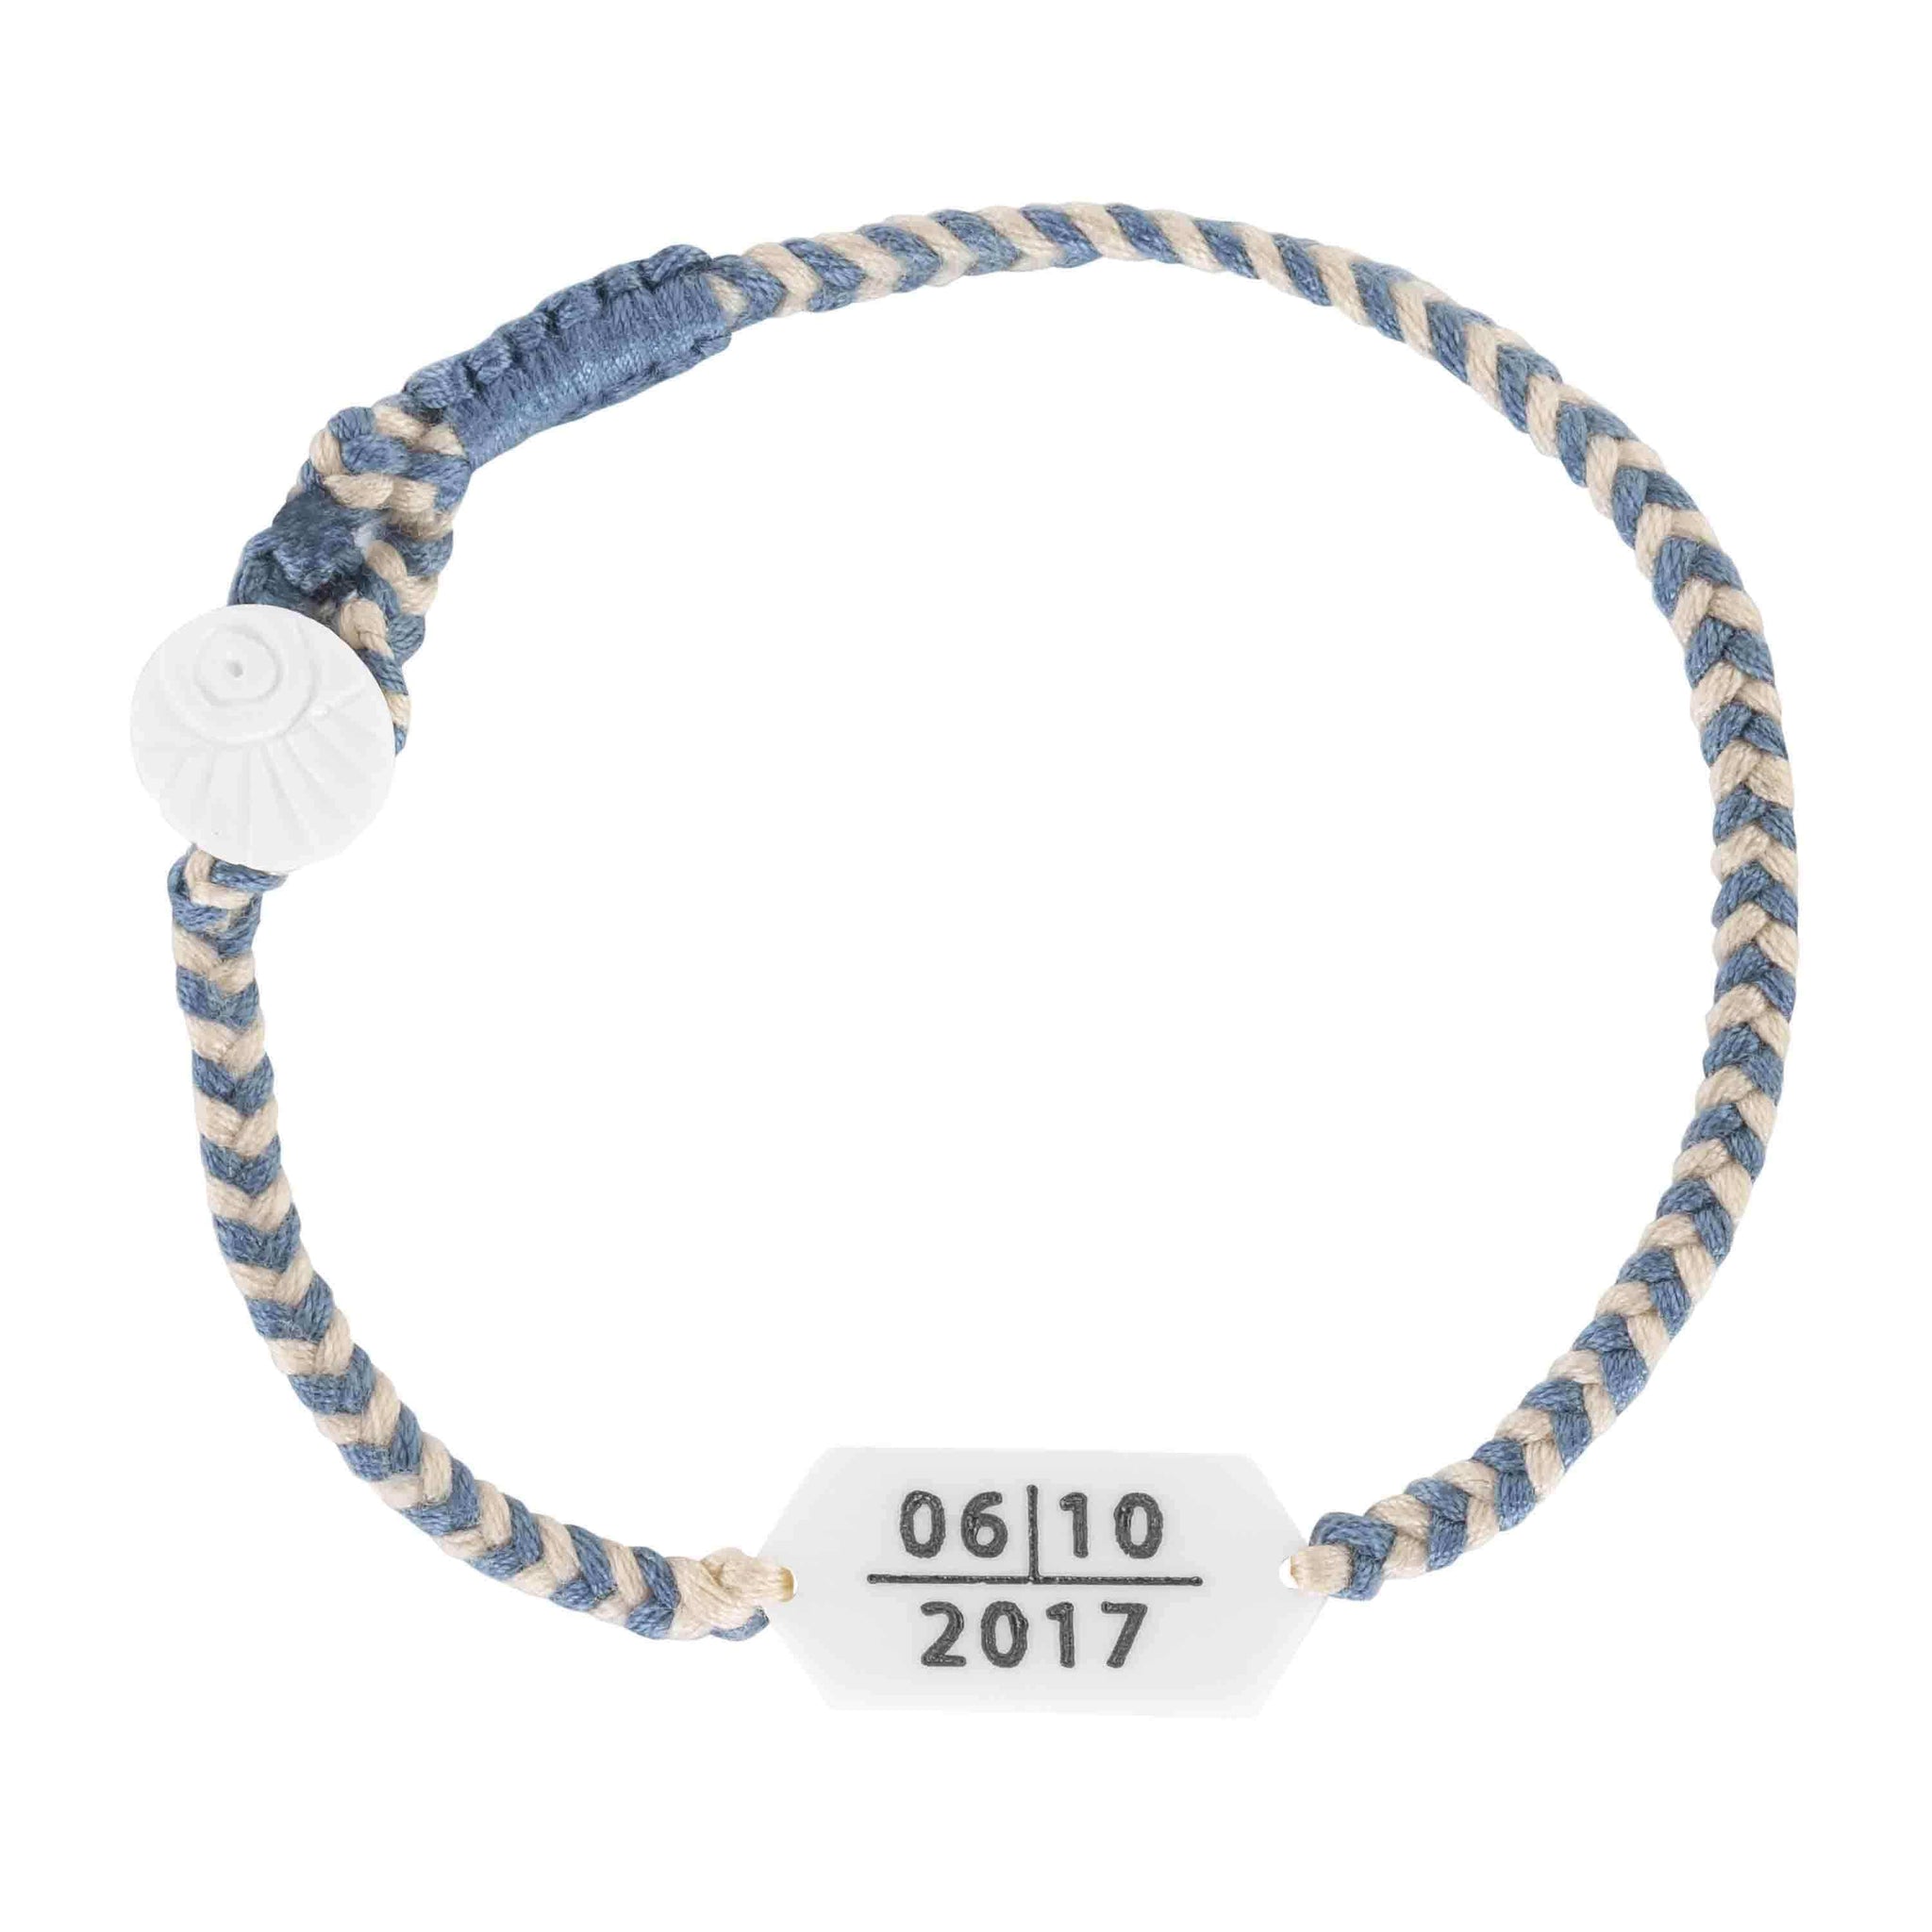 Wanderer Bracelets - Hey, where's your favorite place in the world? Now you  can get the coordinates engraved on a handmade bracelet from Bali - and  support sustainable work for village artisans.